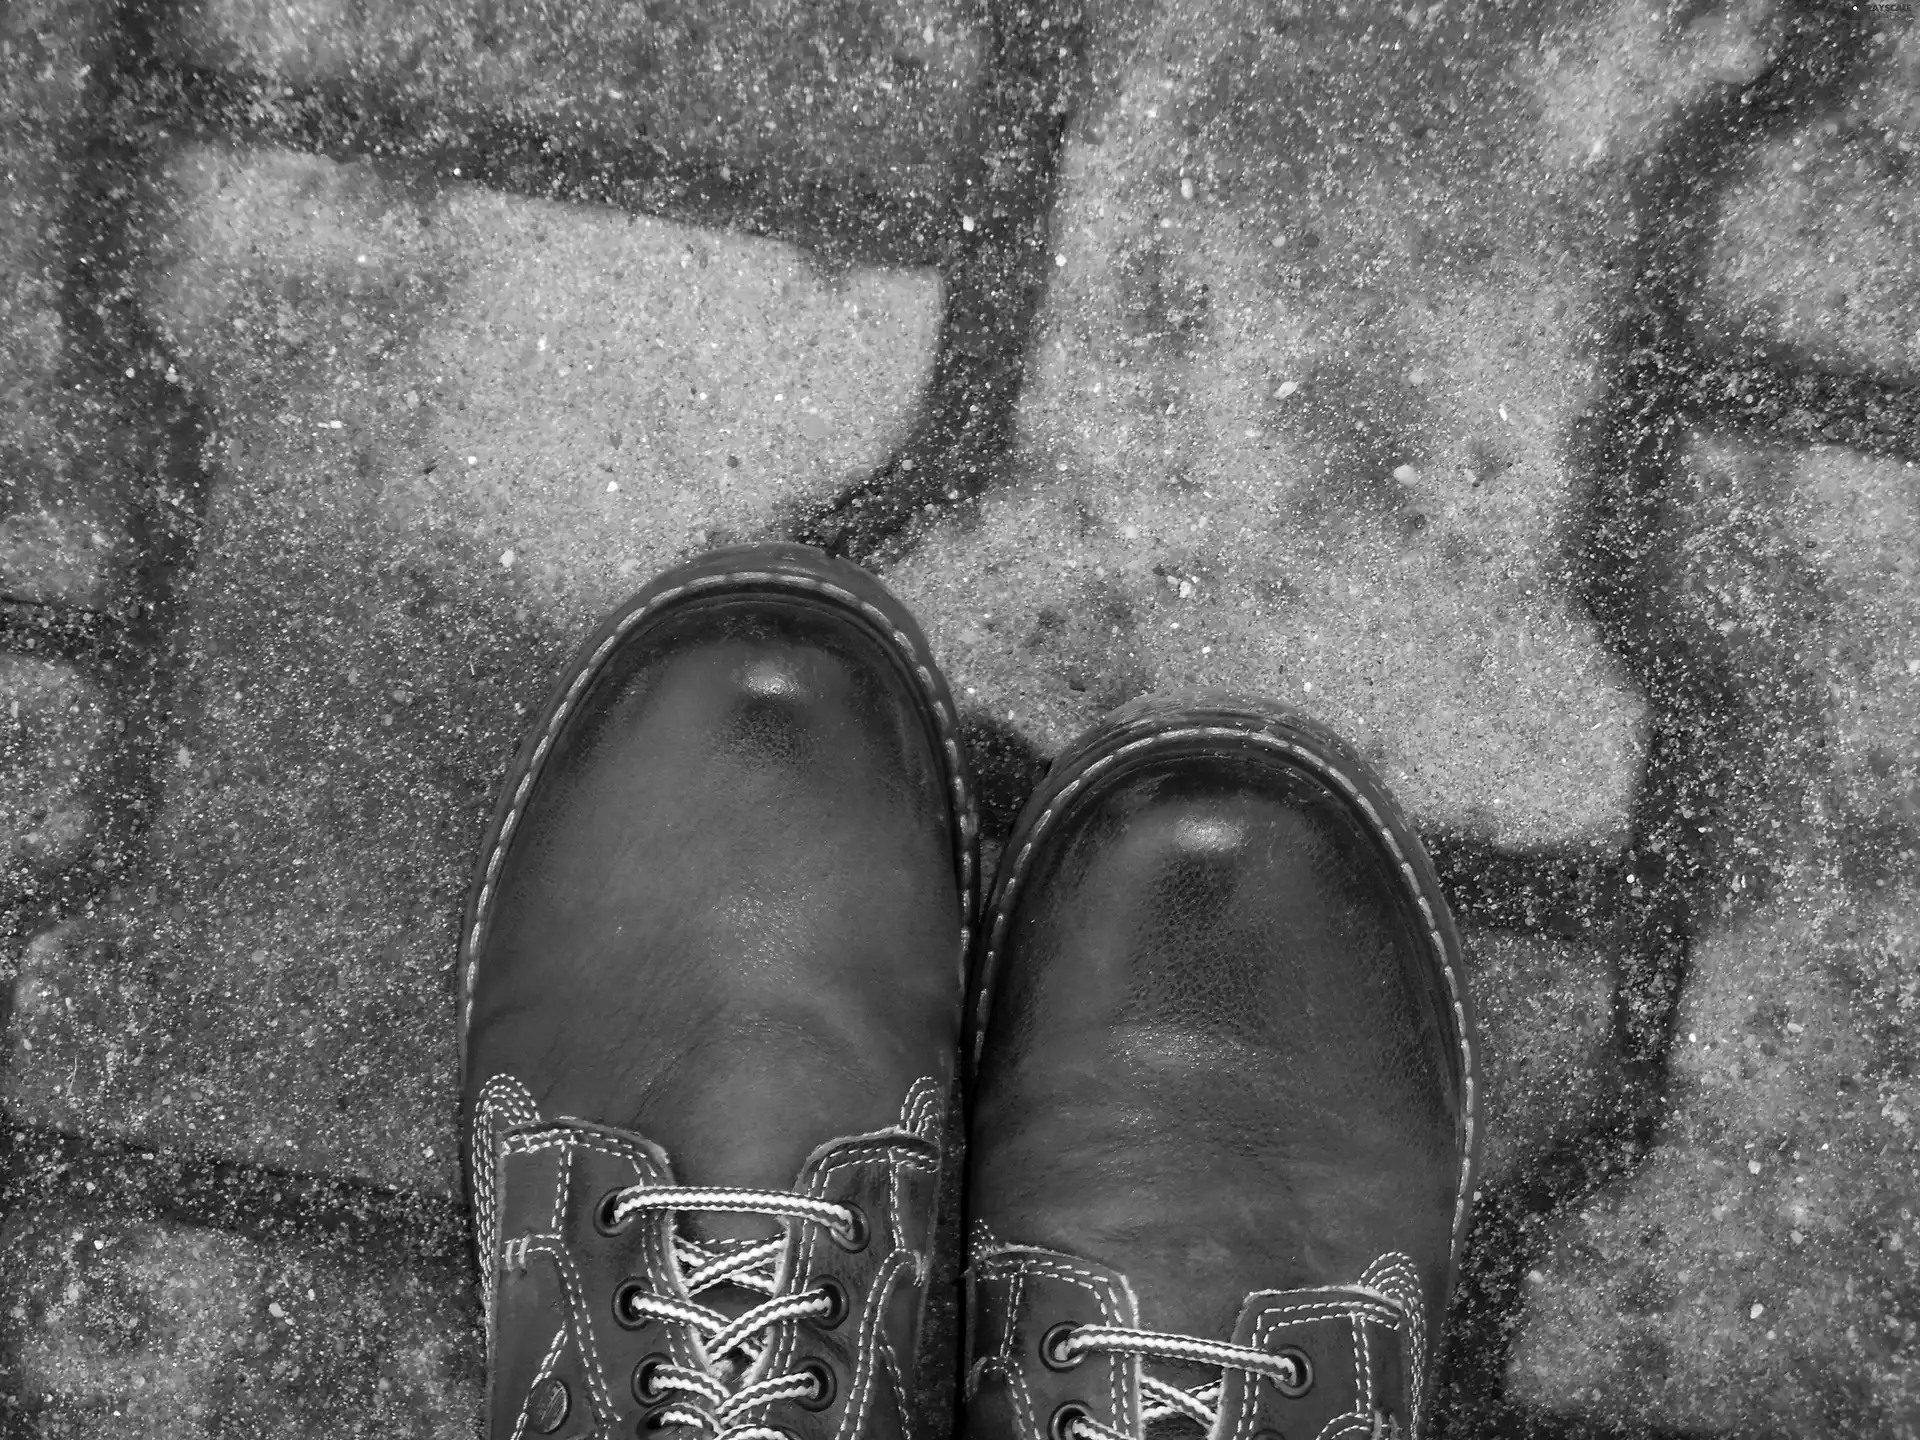 Pavement, Boots, loneliness